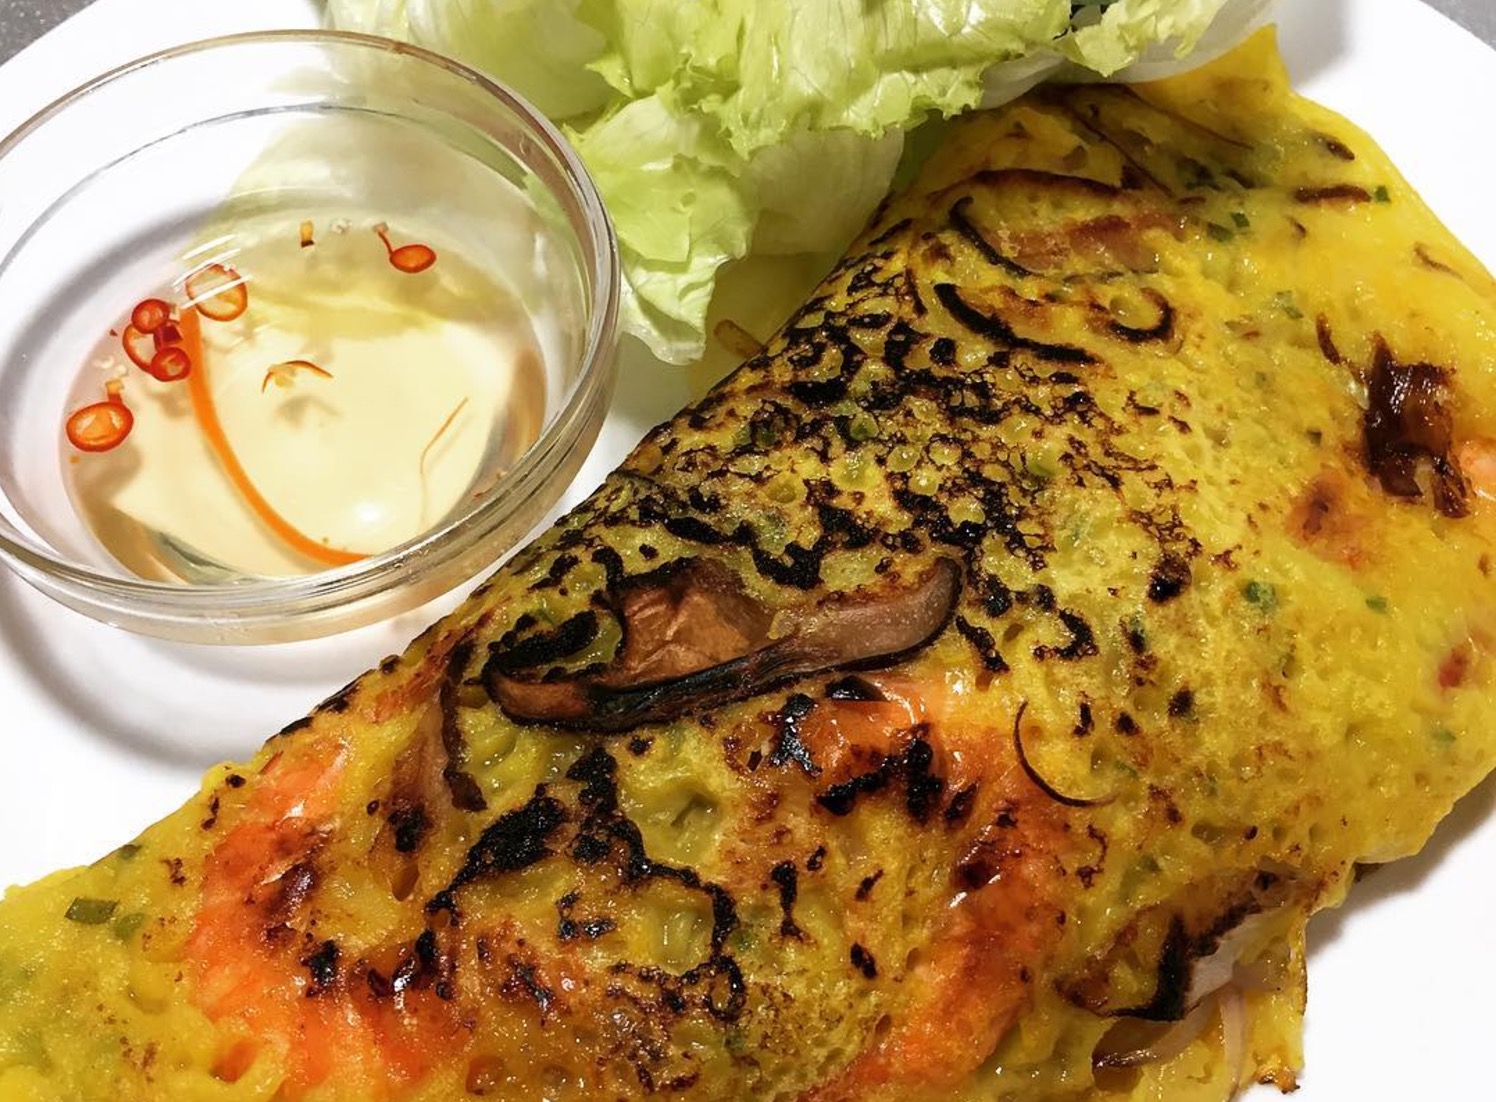 Chef Mai Pham’s Vietnamese Banh Xeo or sizzling crepe with shrimp and pork. PHOTO: Ching Dee